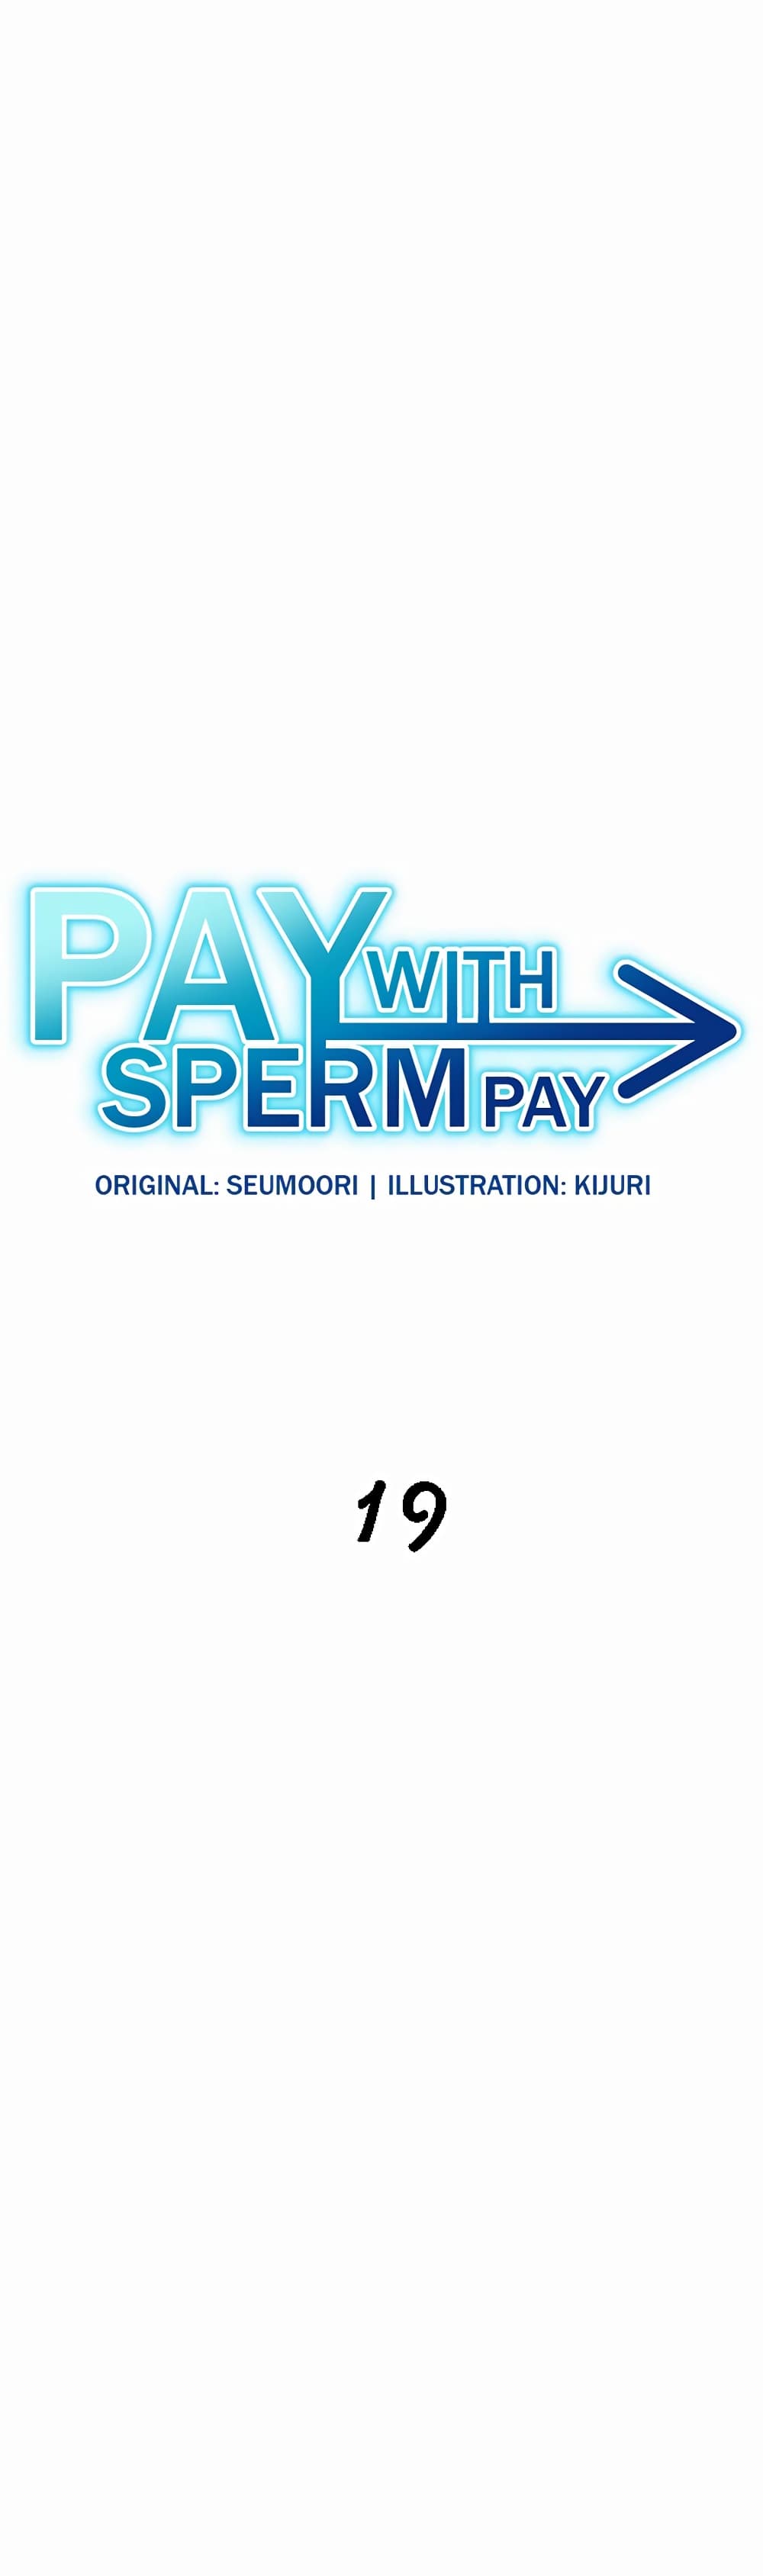 Pay with Sperm Pay 19-19